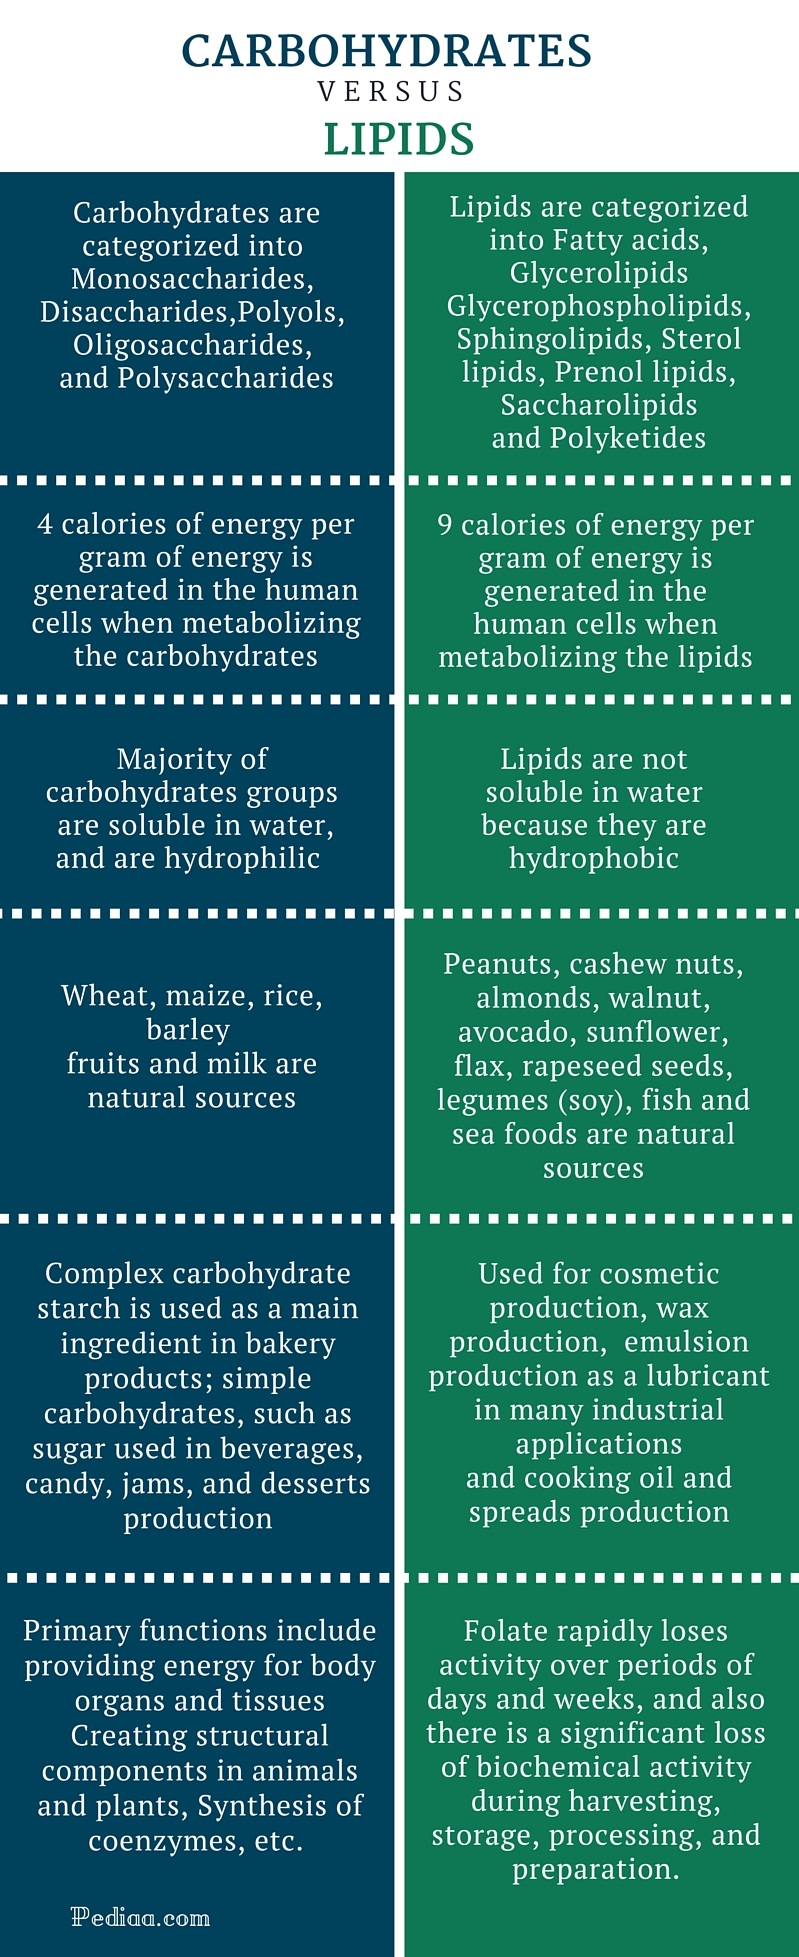 Difference Between Carbohydrates and Lipids - infographic